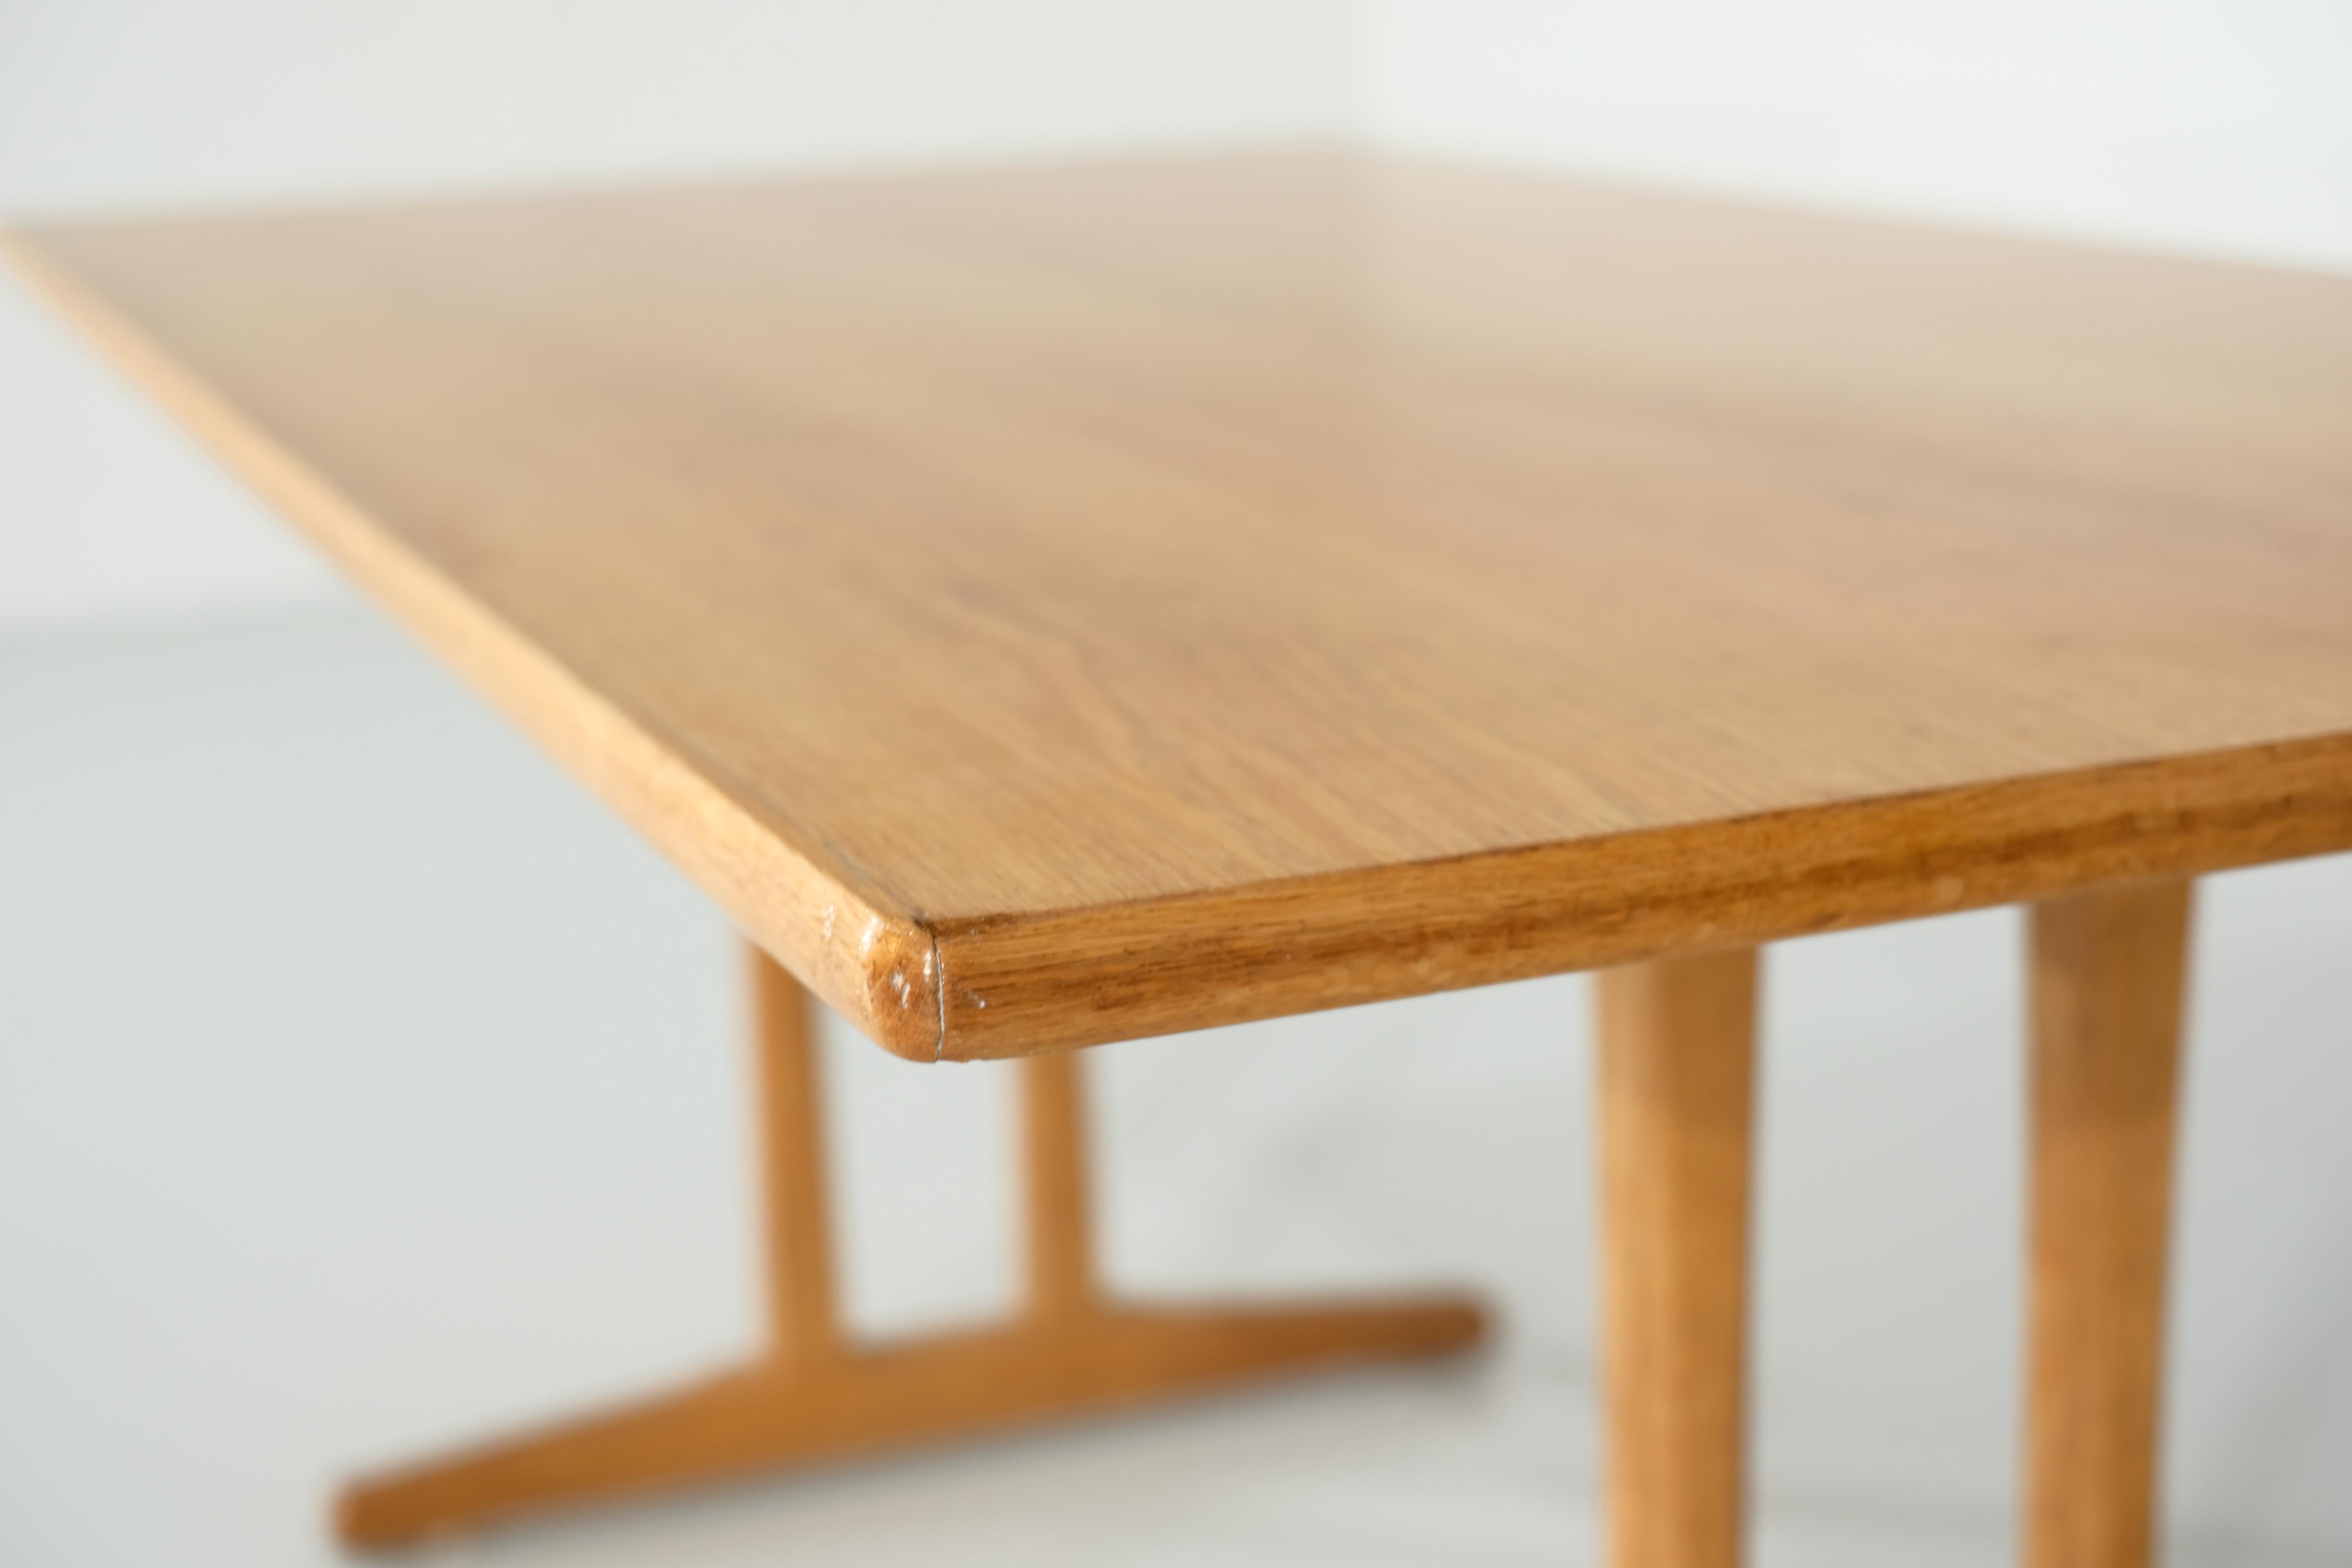 20th Century C18 Shaker table by Borge Mogensen for FDB Mobler - 1950s For Sale